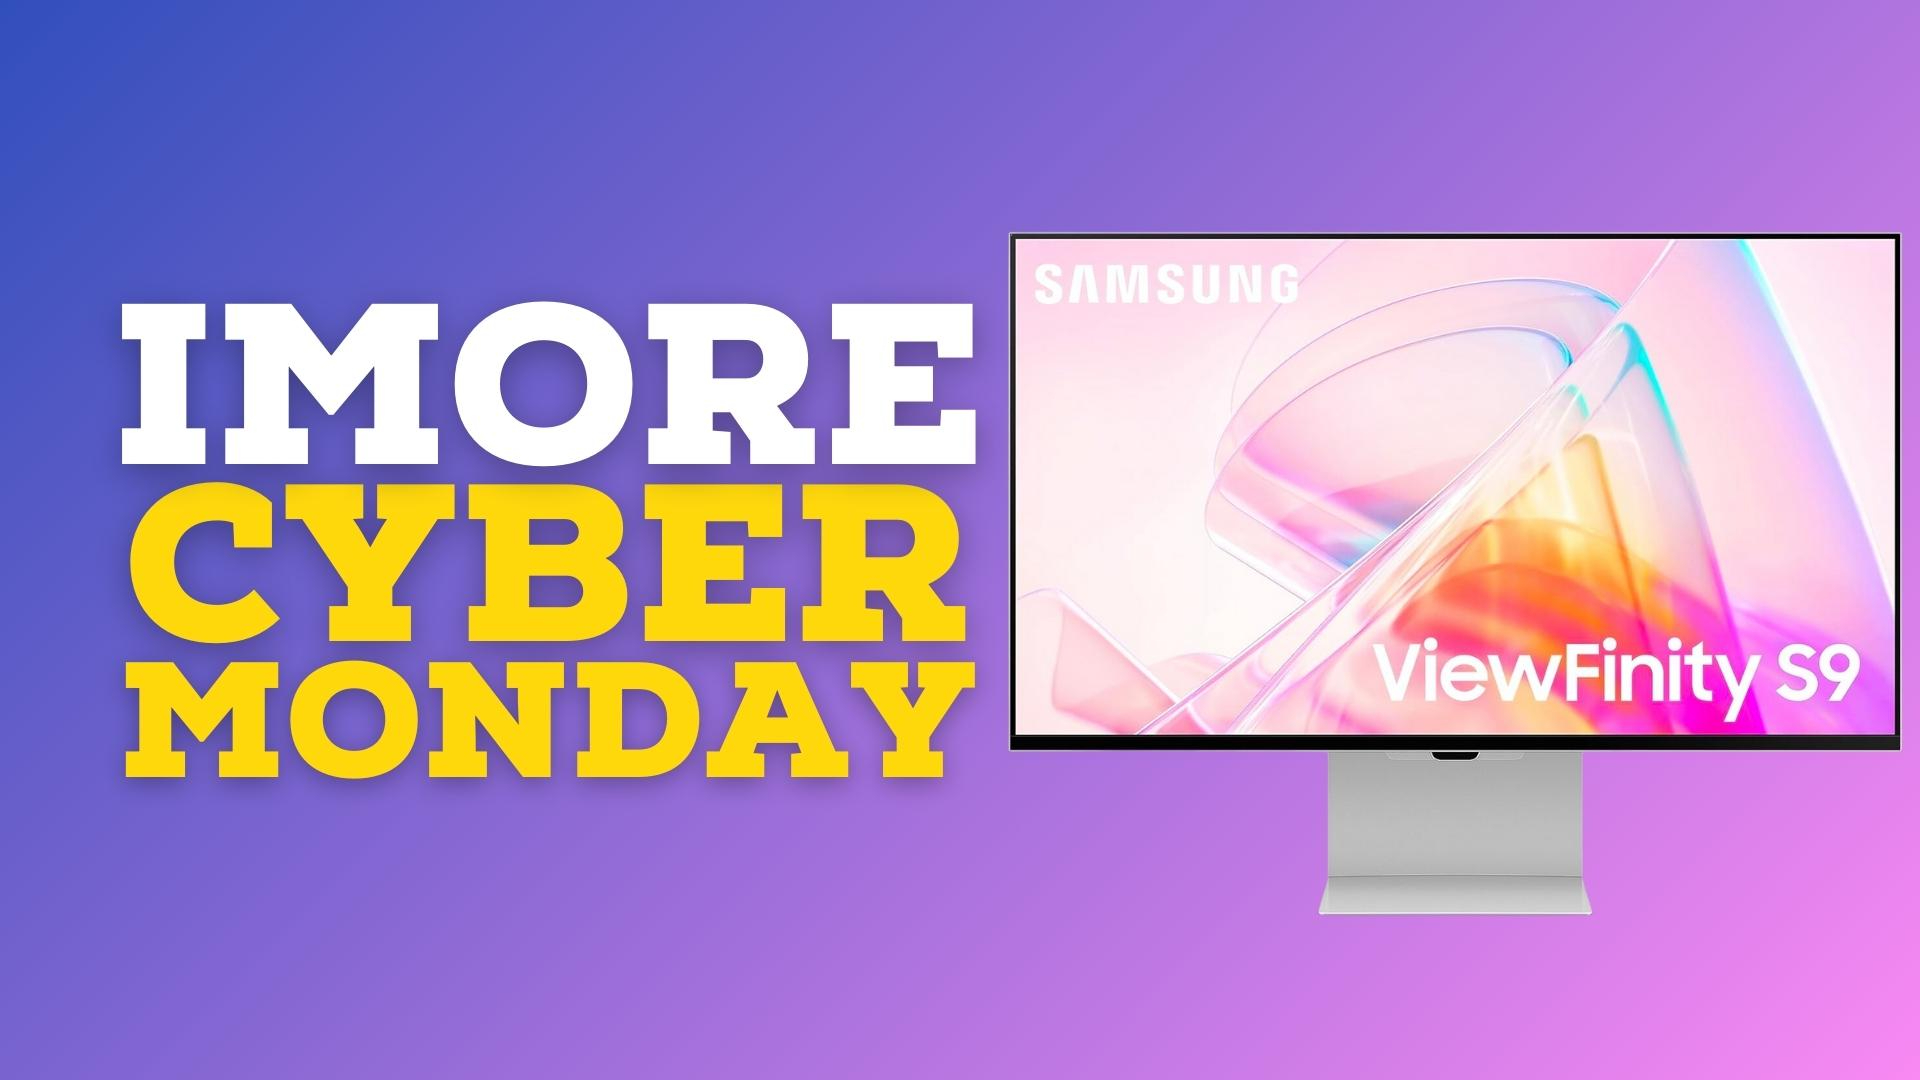 Samsung's epic Studio Display alternative falls to insane low Cyber Monday price at 40% off — but you need to be quick